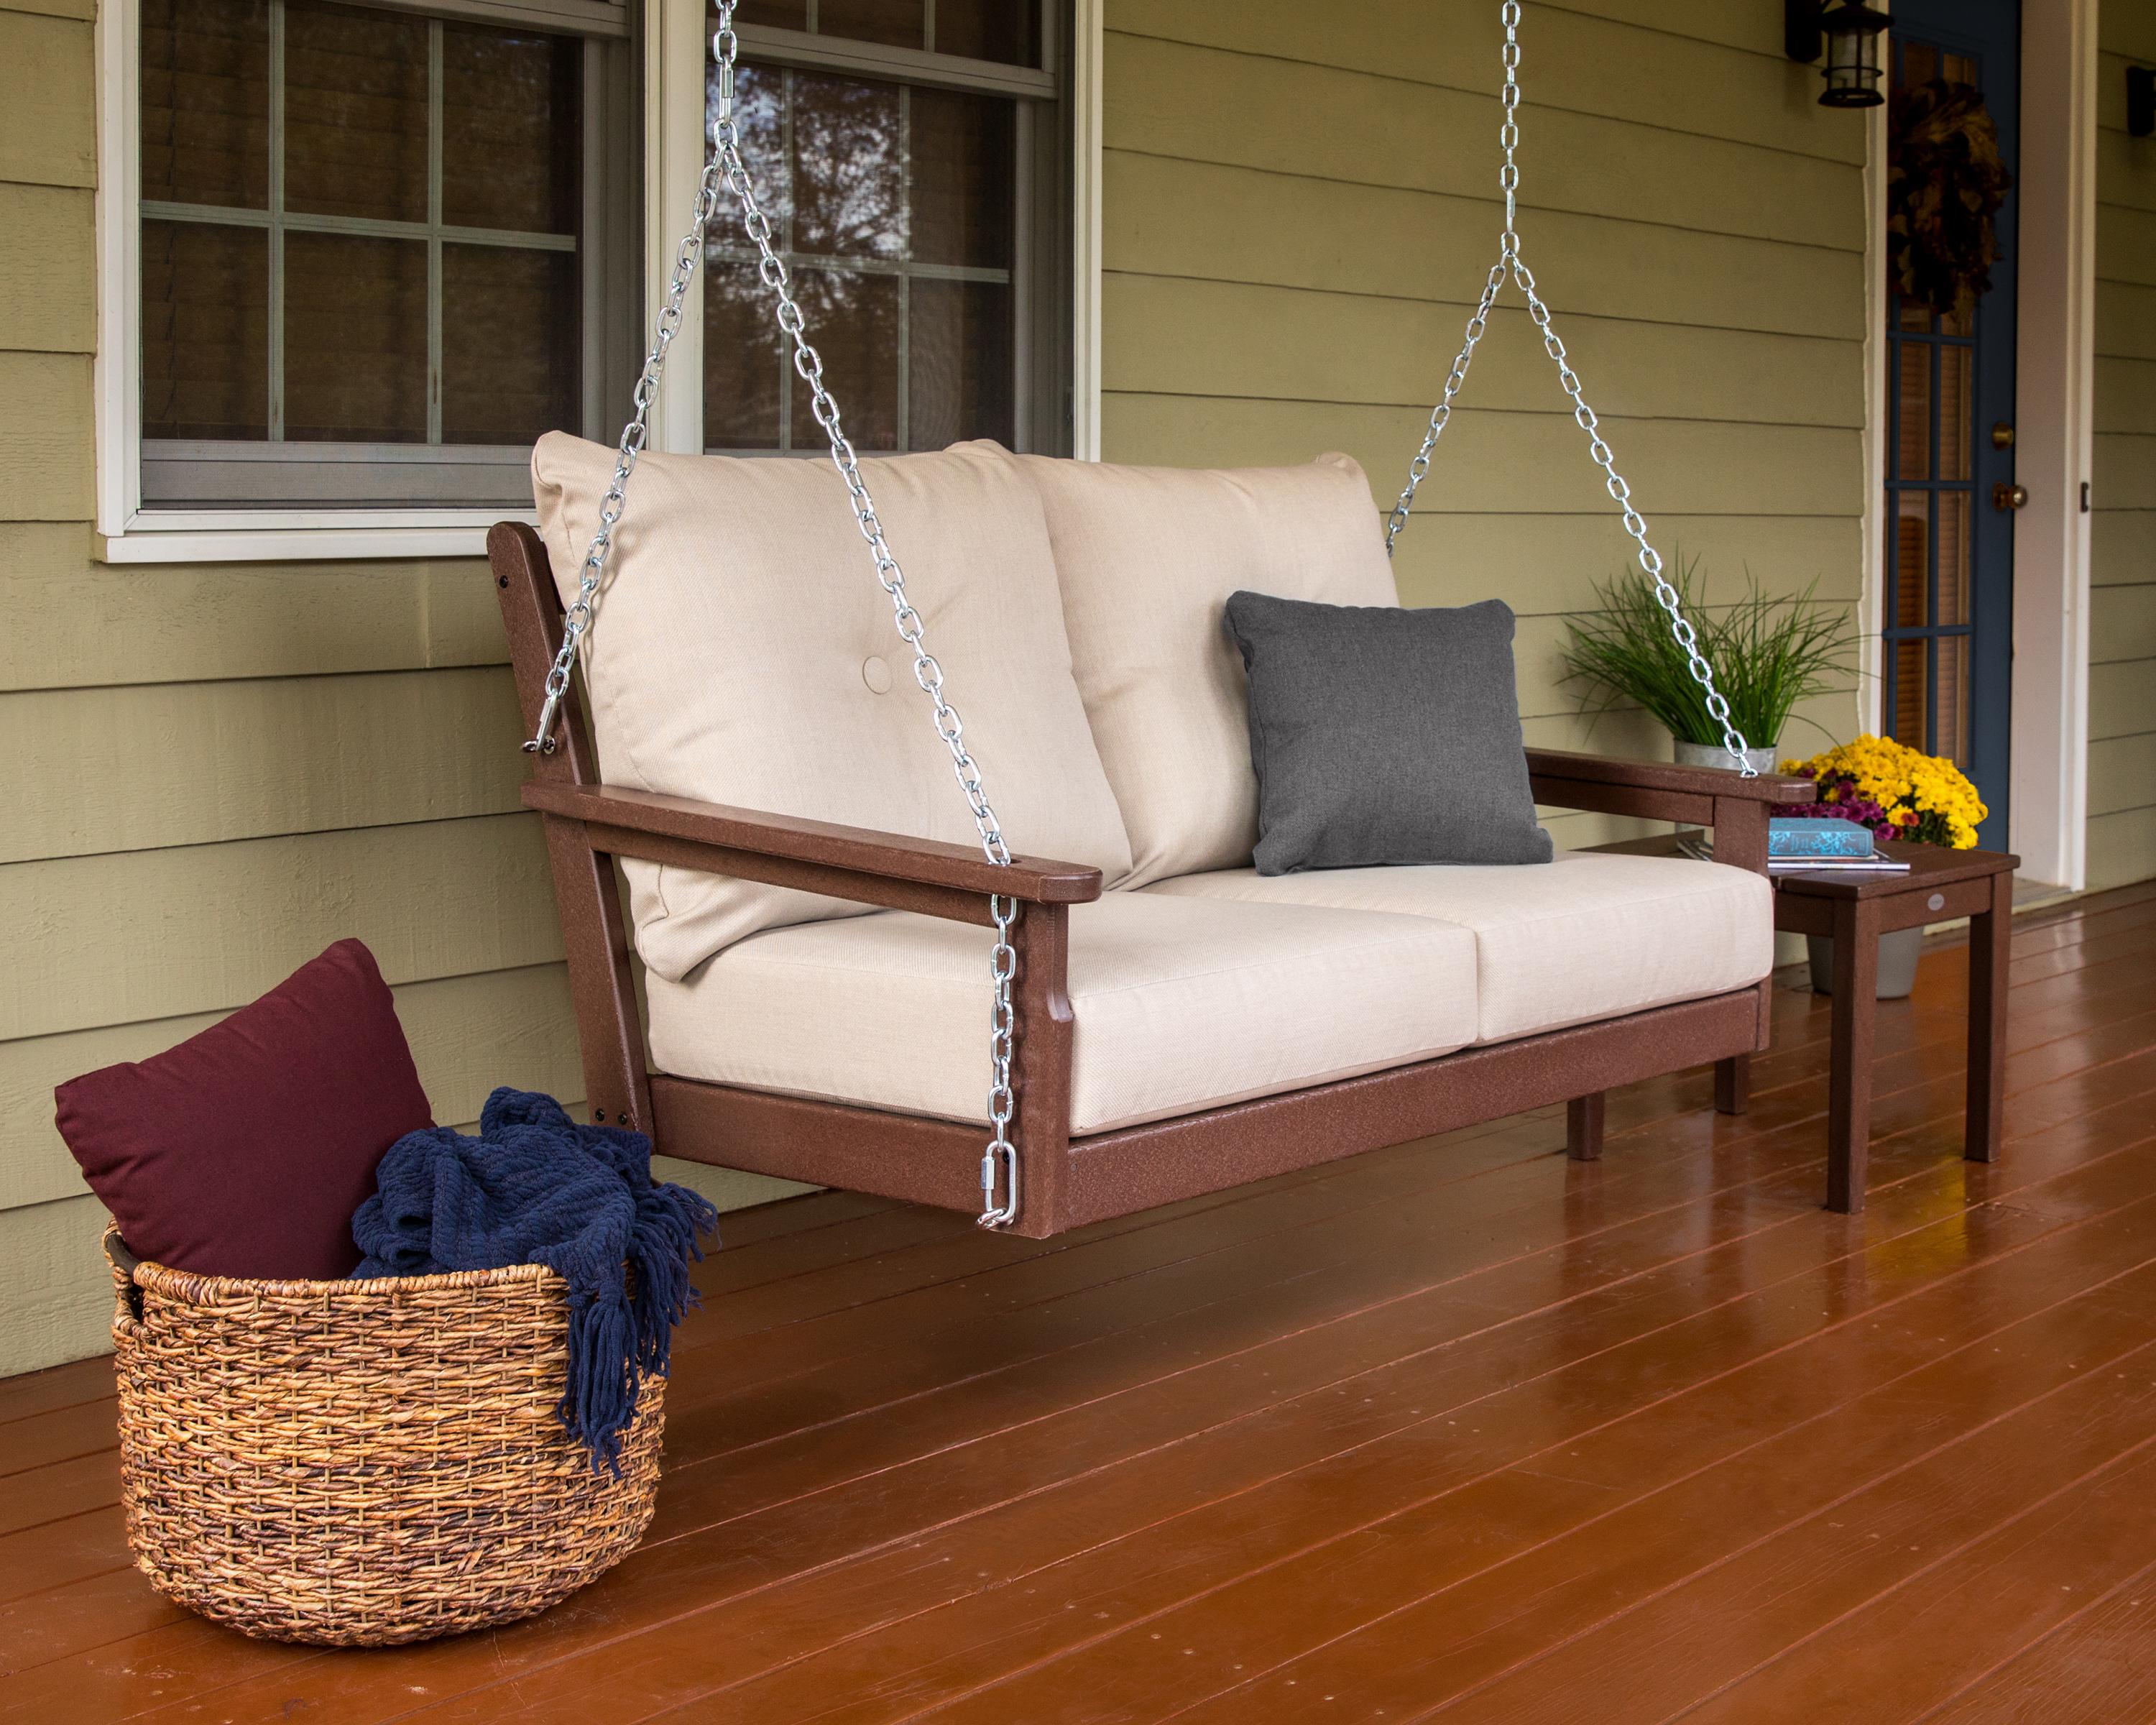 What to Consider Before Hanging a Porch Swing. POLYWOOD Vineyard Deep Seating Swing.